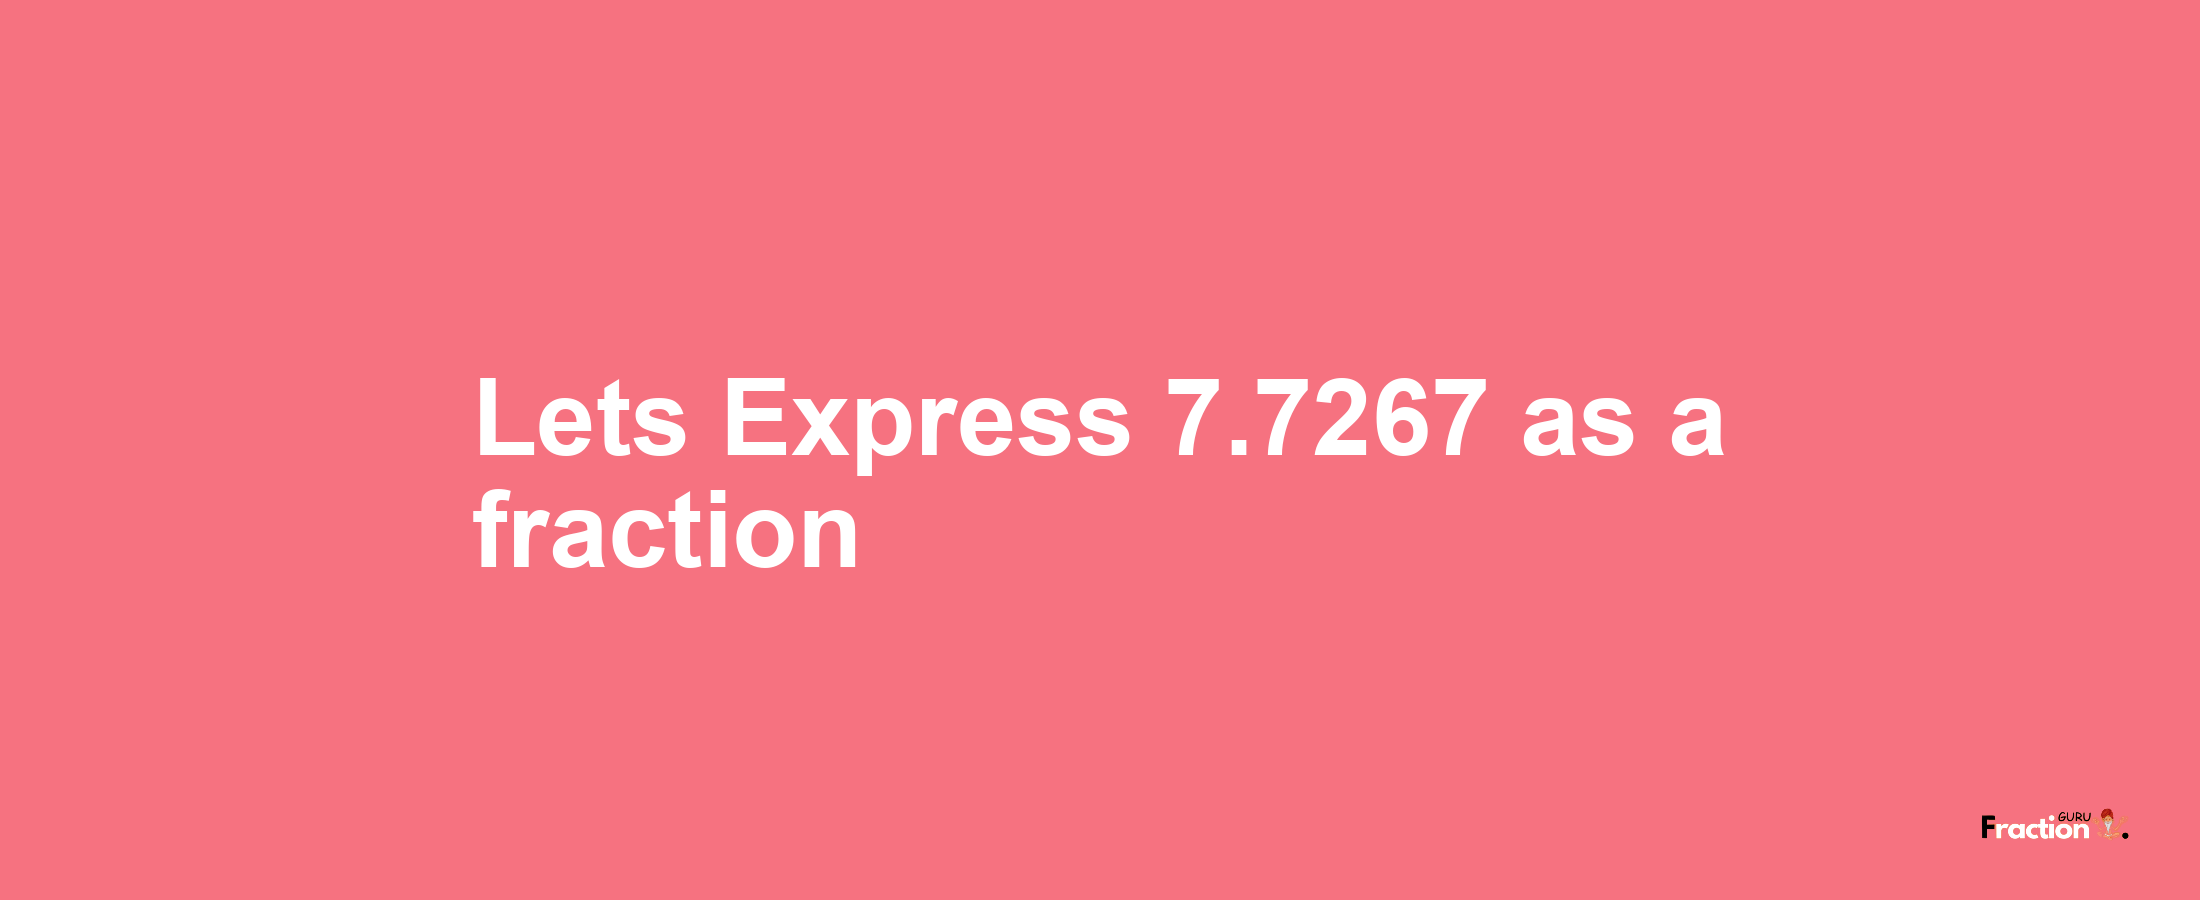 Lets Express 7.7267 as afraction